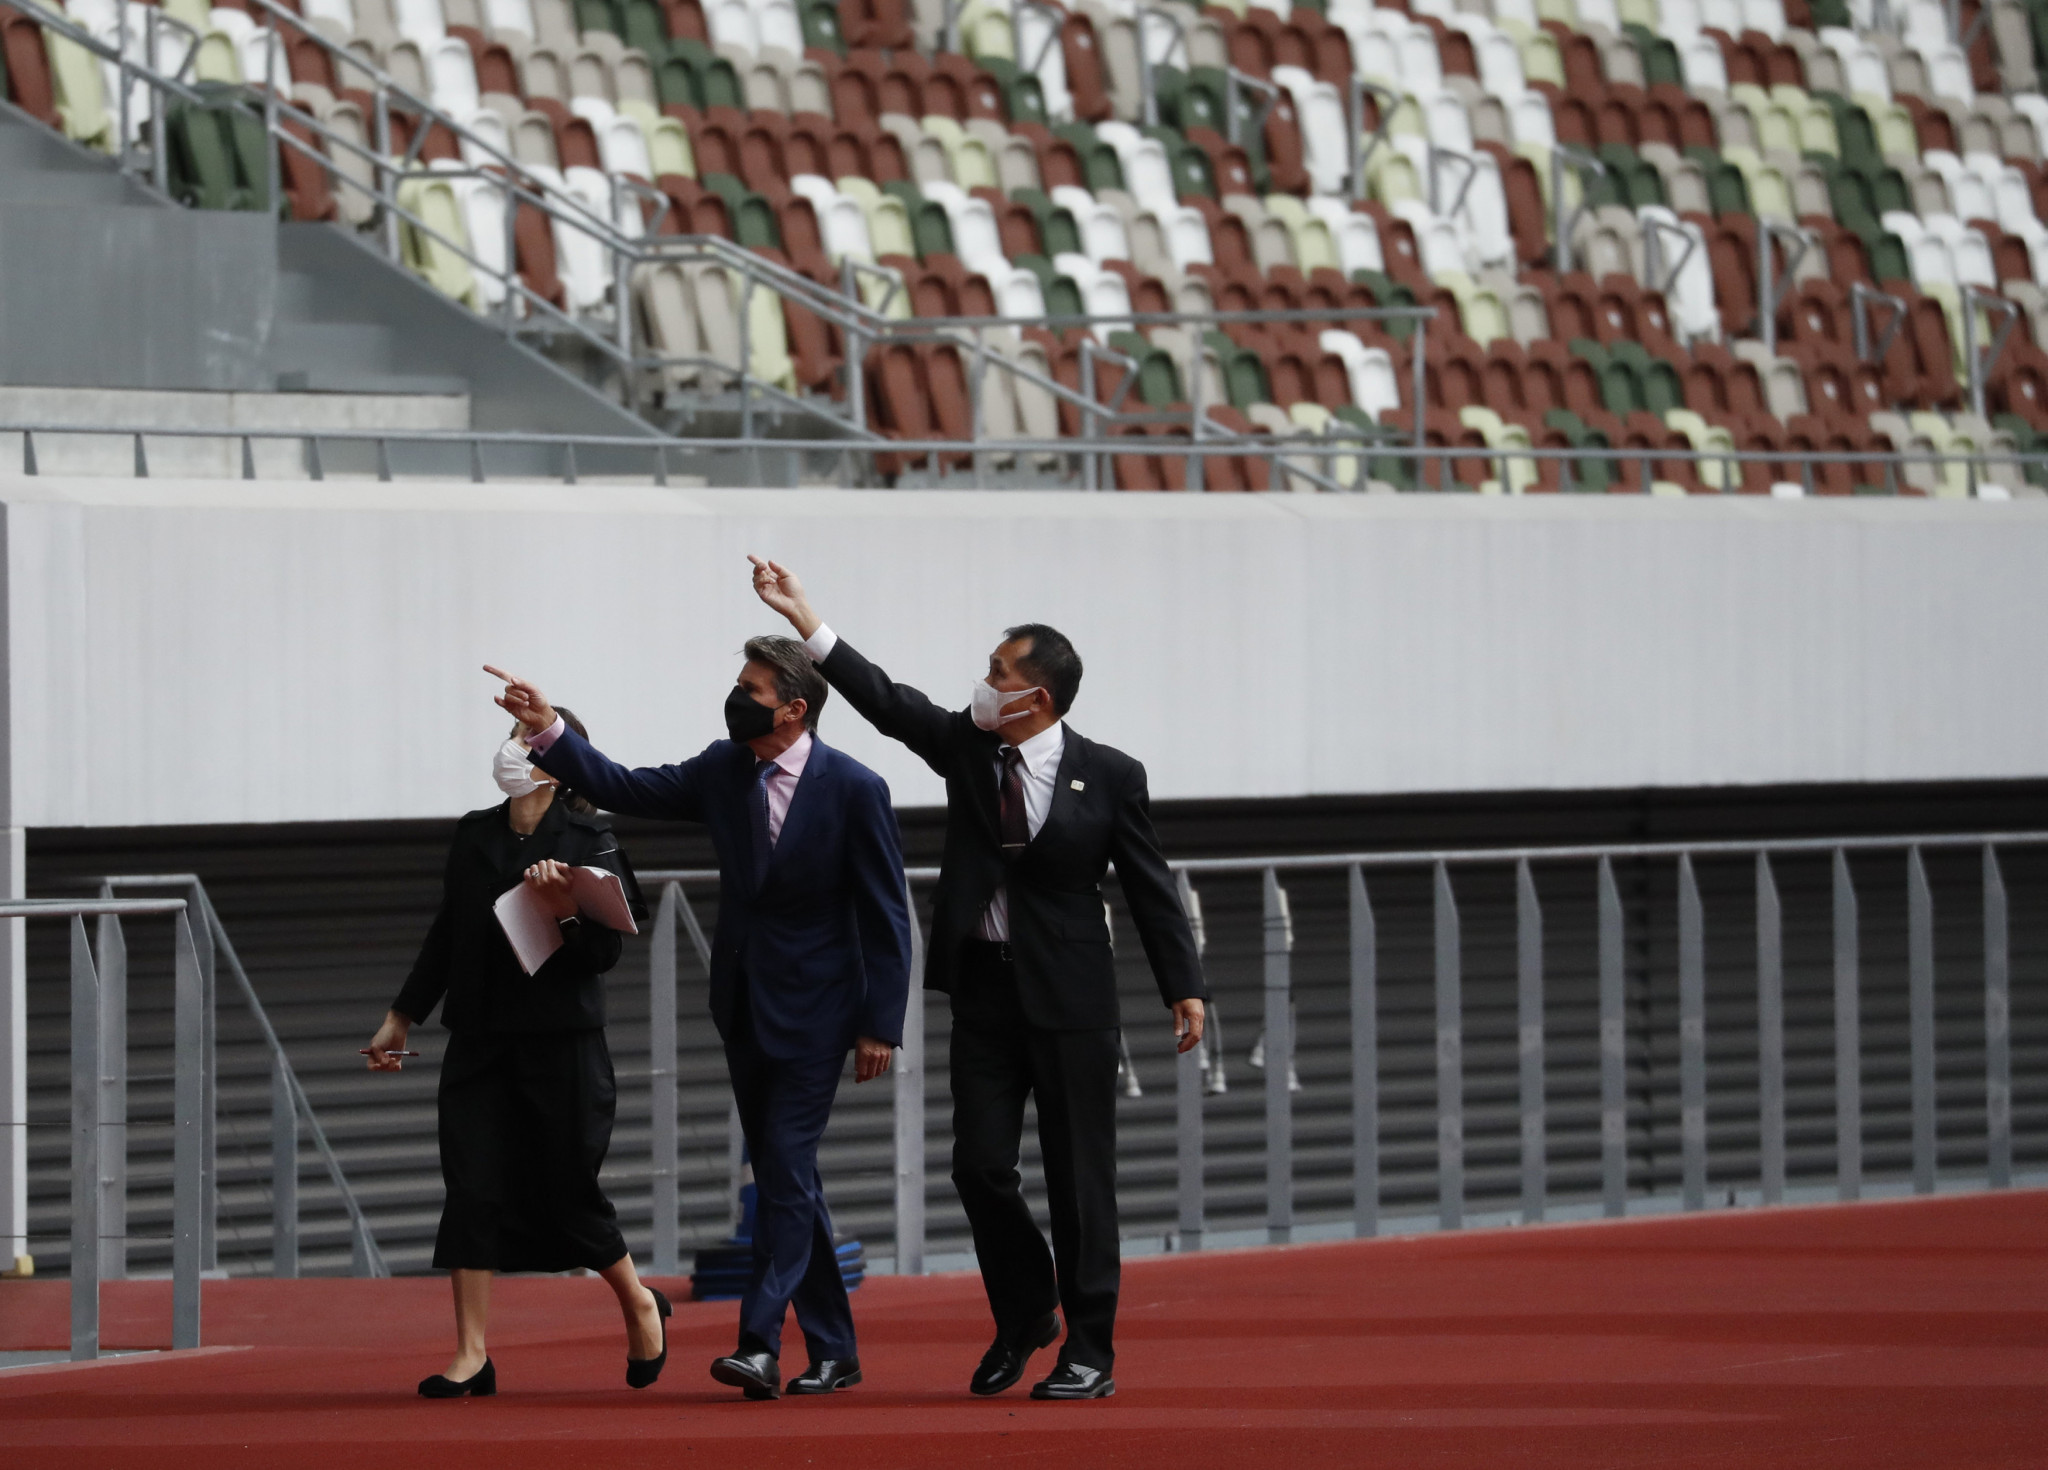 World Athletics President Sebastian Coe, centre, visited the Olympic Stadium in Tokyo in October ©Getty Images